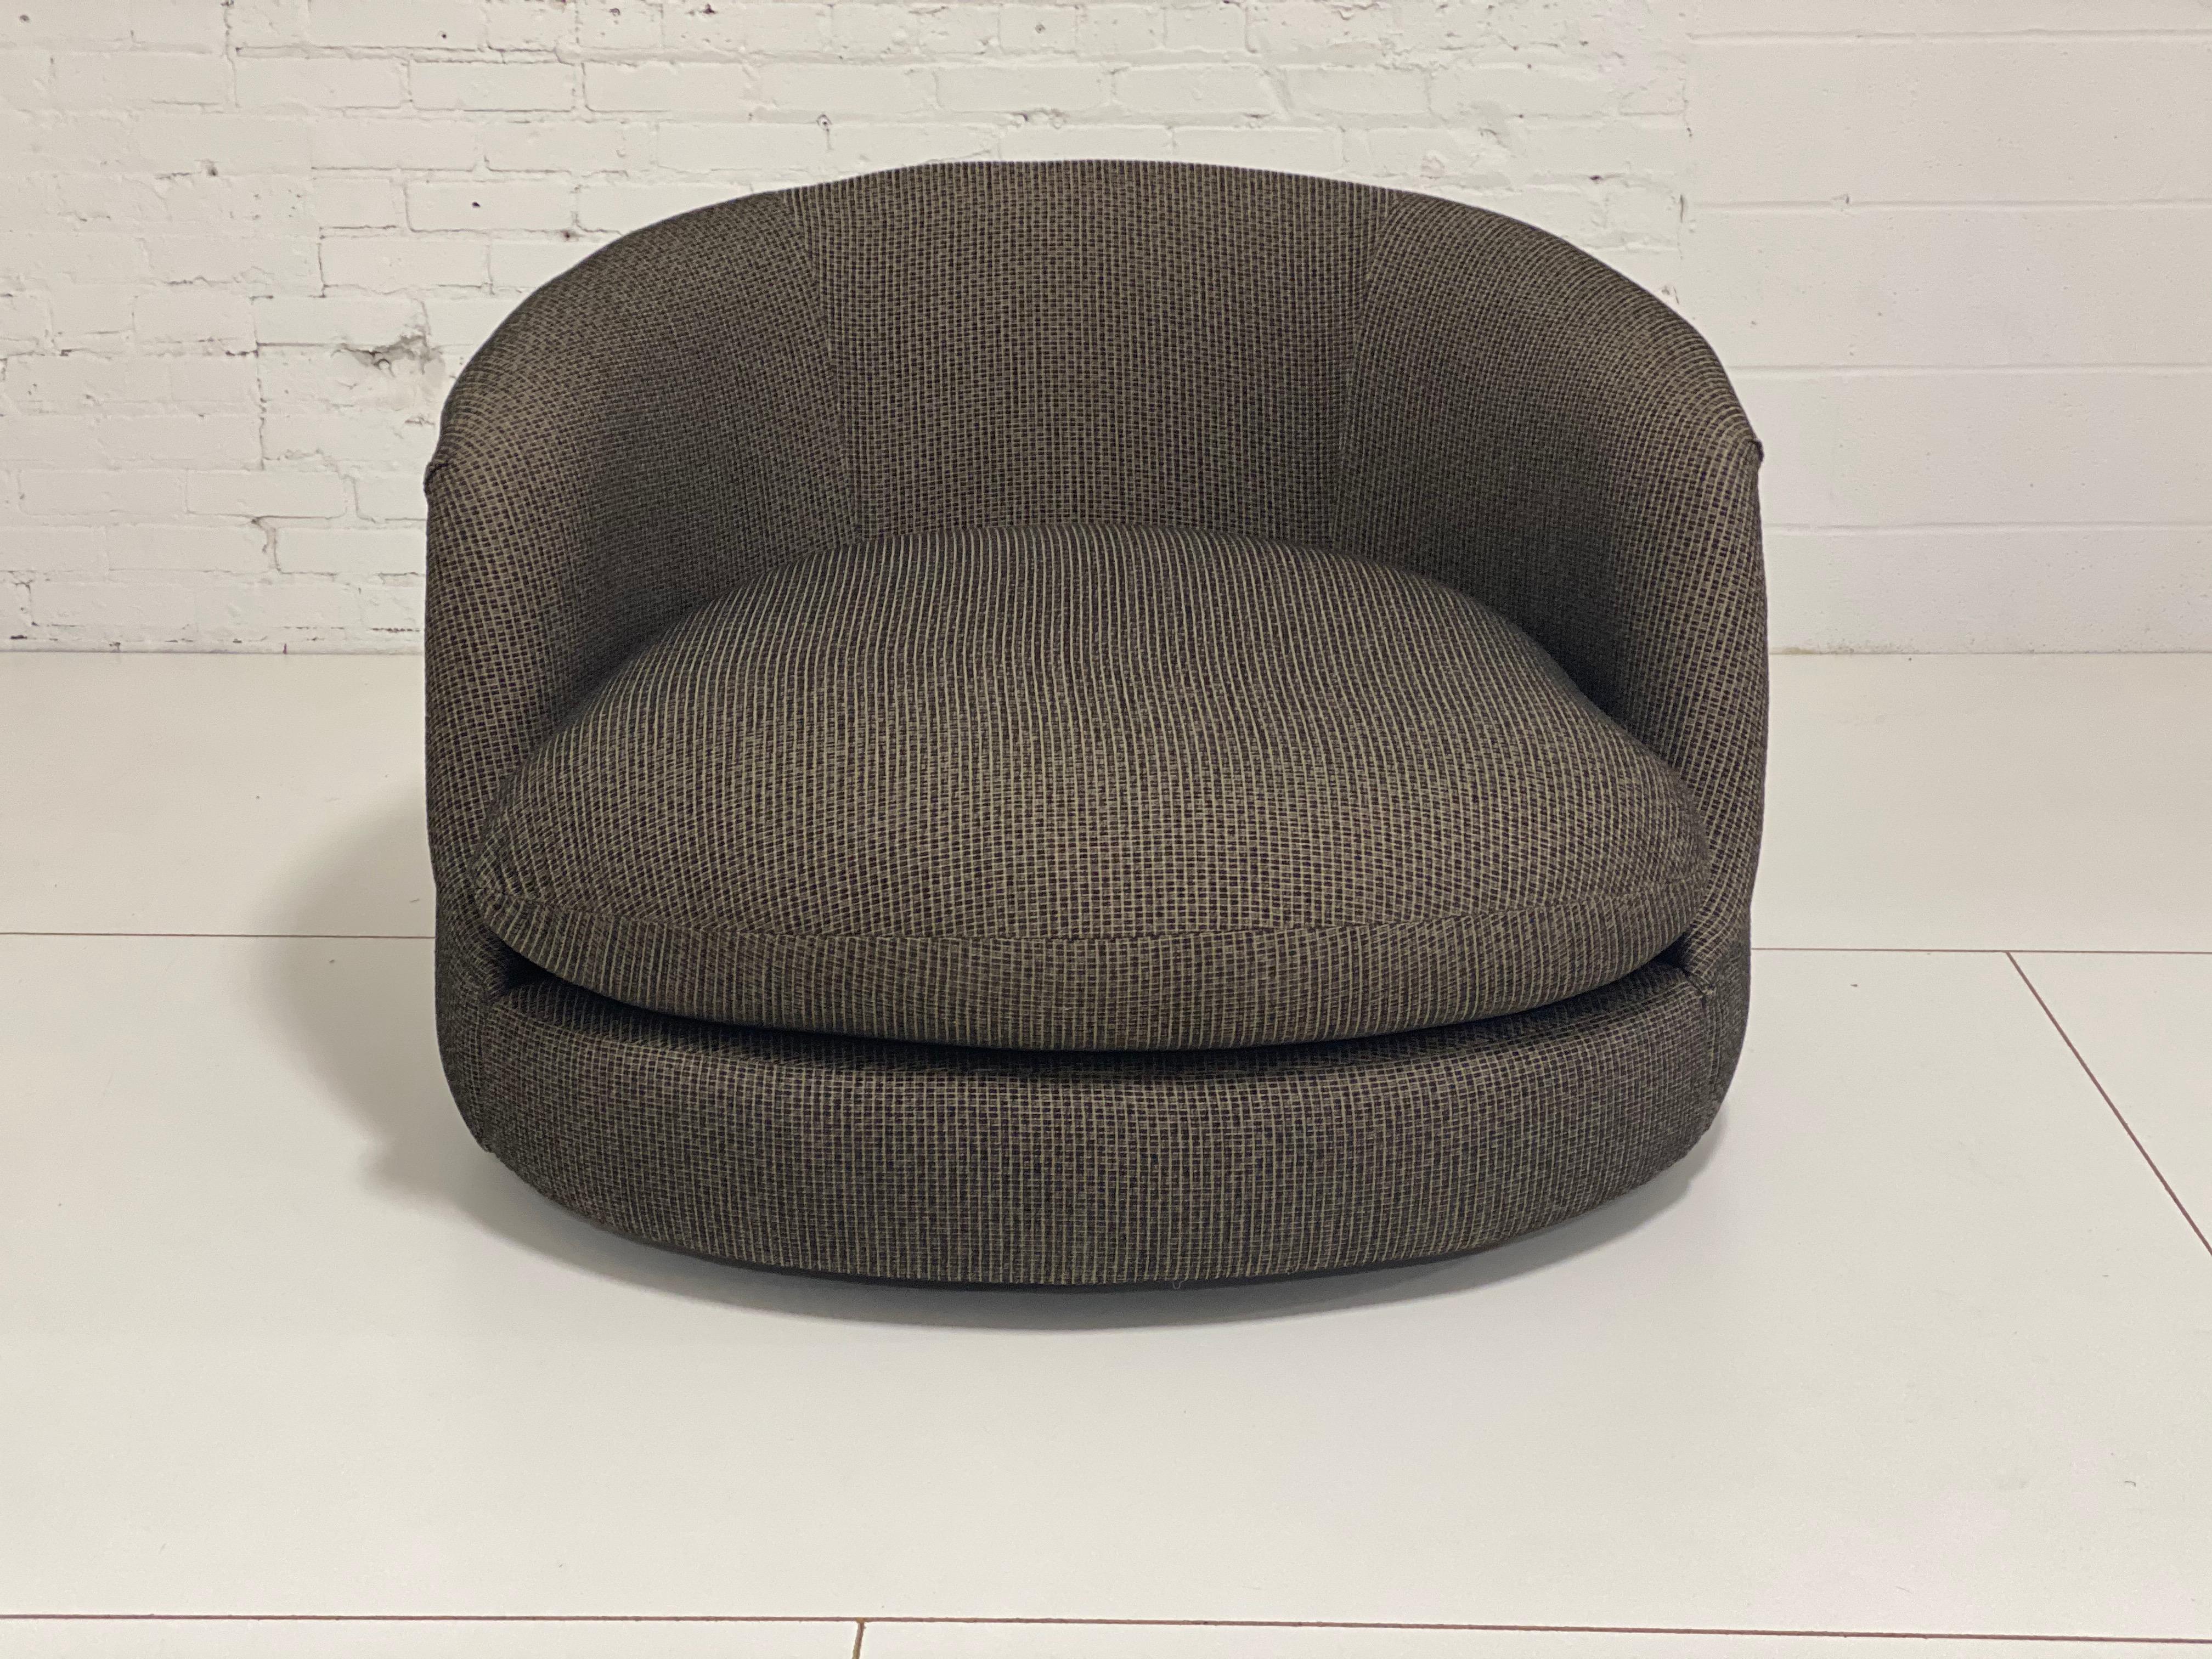 Oversize swivel chair by Milo Baughman for Thayer-Coggin. Original fabric and chrome swivel base in great condition.